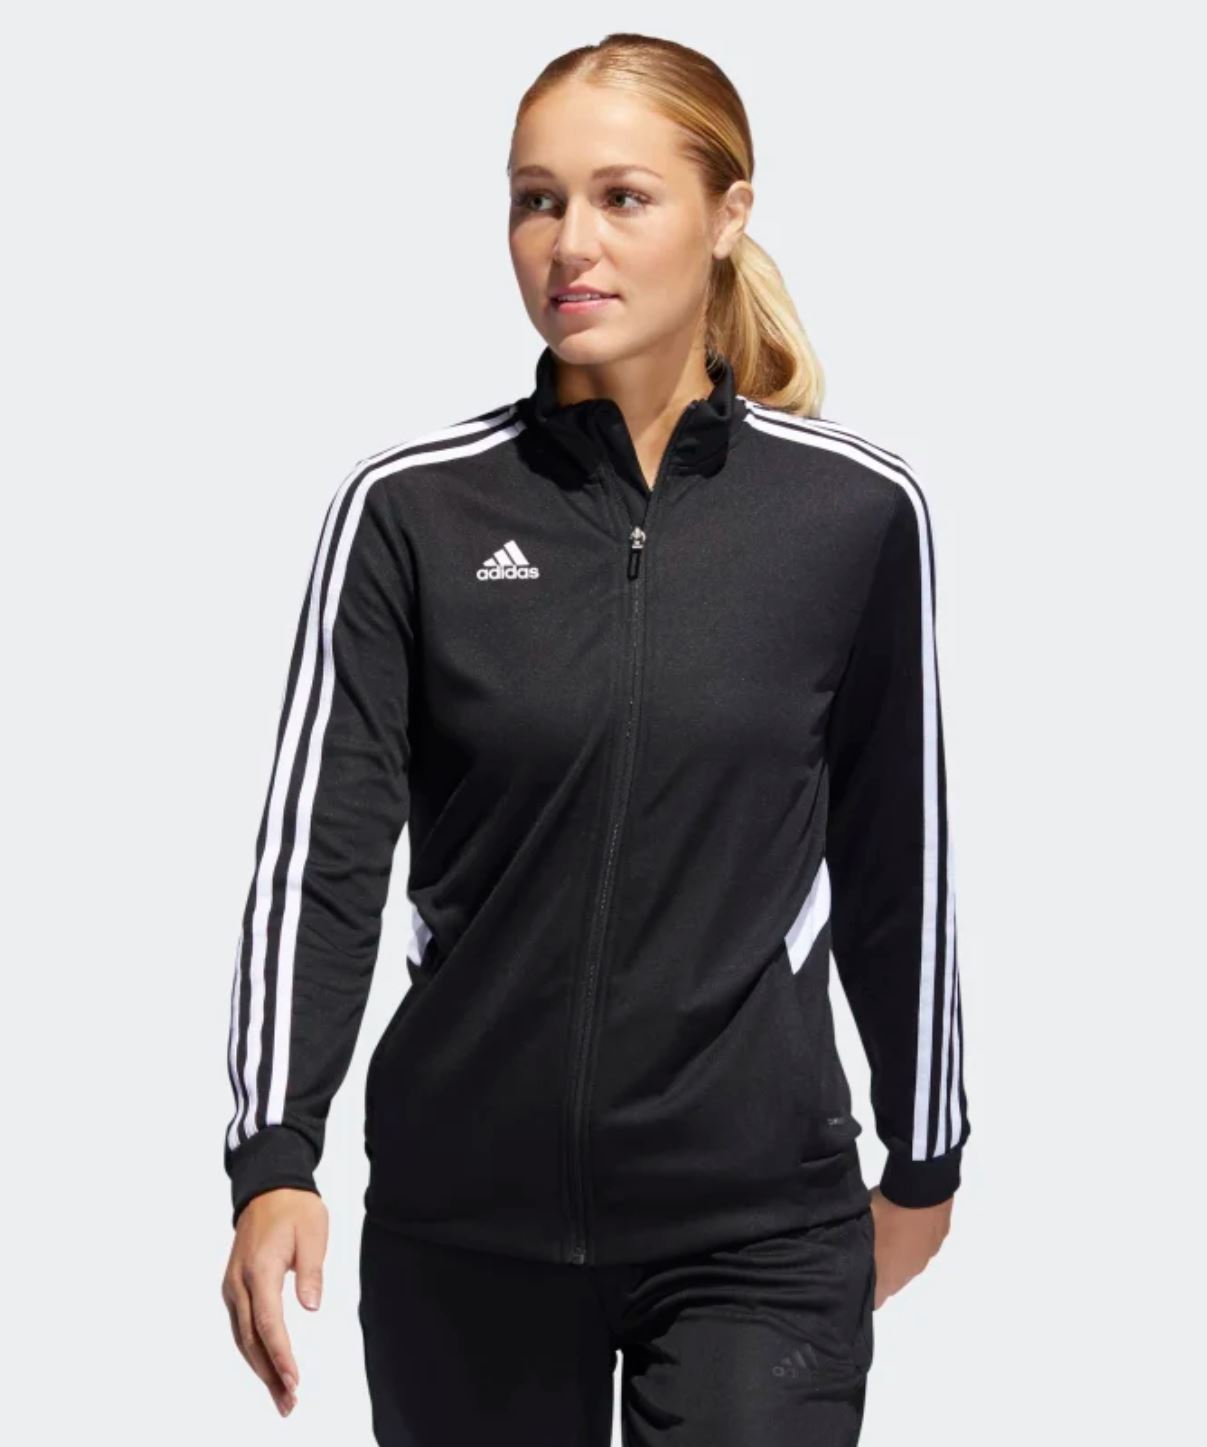 adidas: Presidents' Day Sale - Save up 